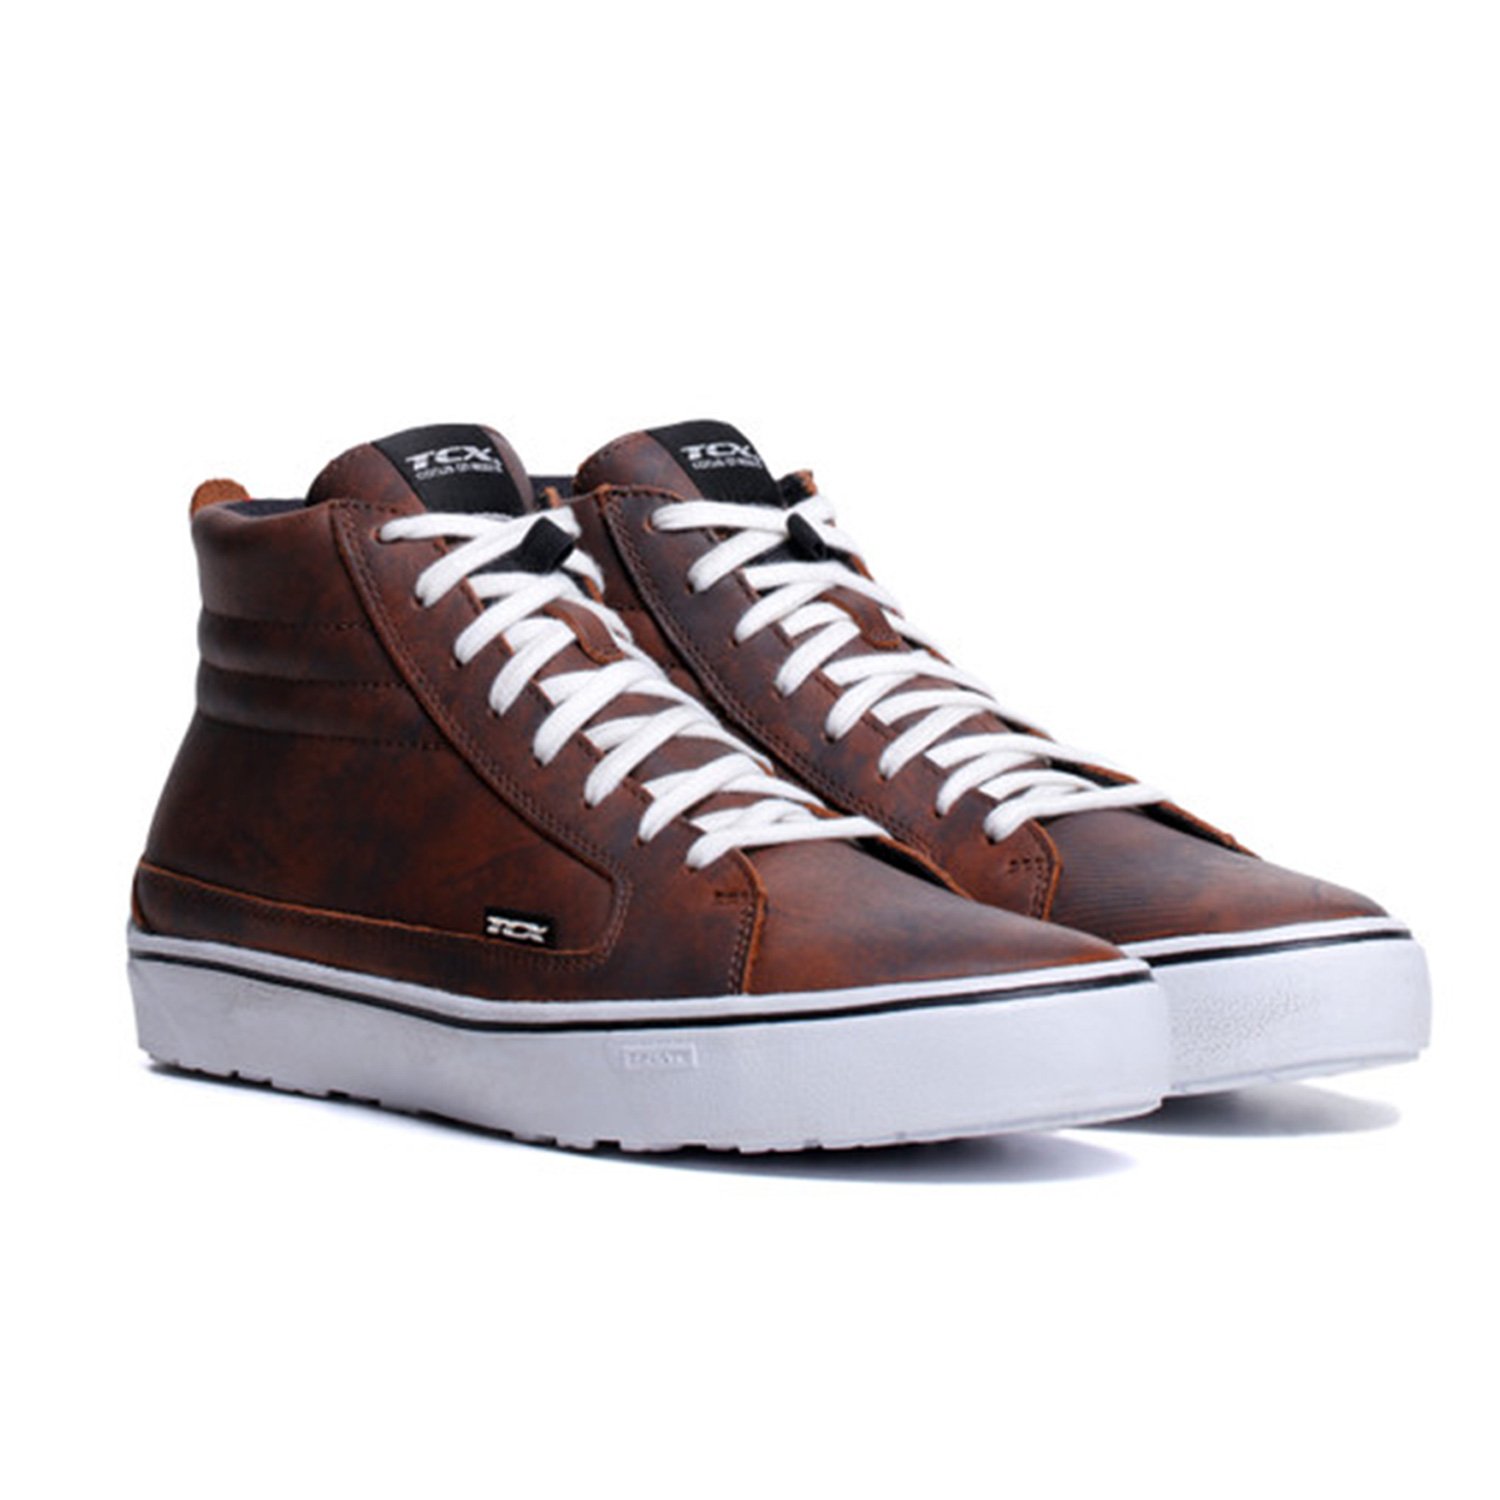 Image of TCX Street 3 WP Brown White Size 39 ID 8051019547828